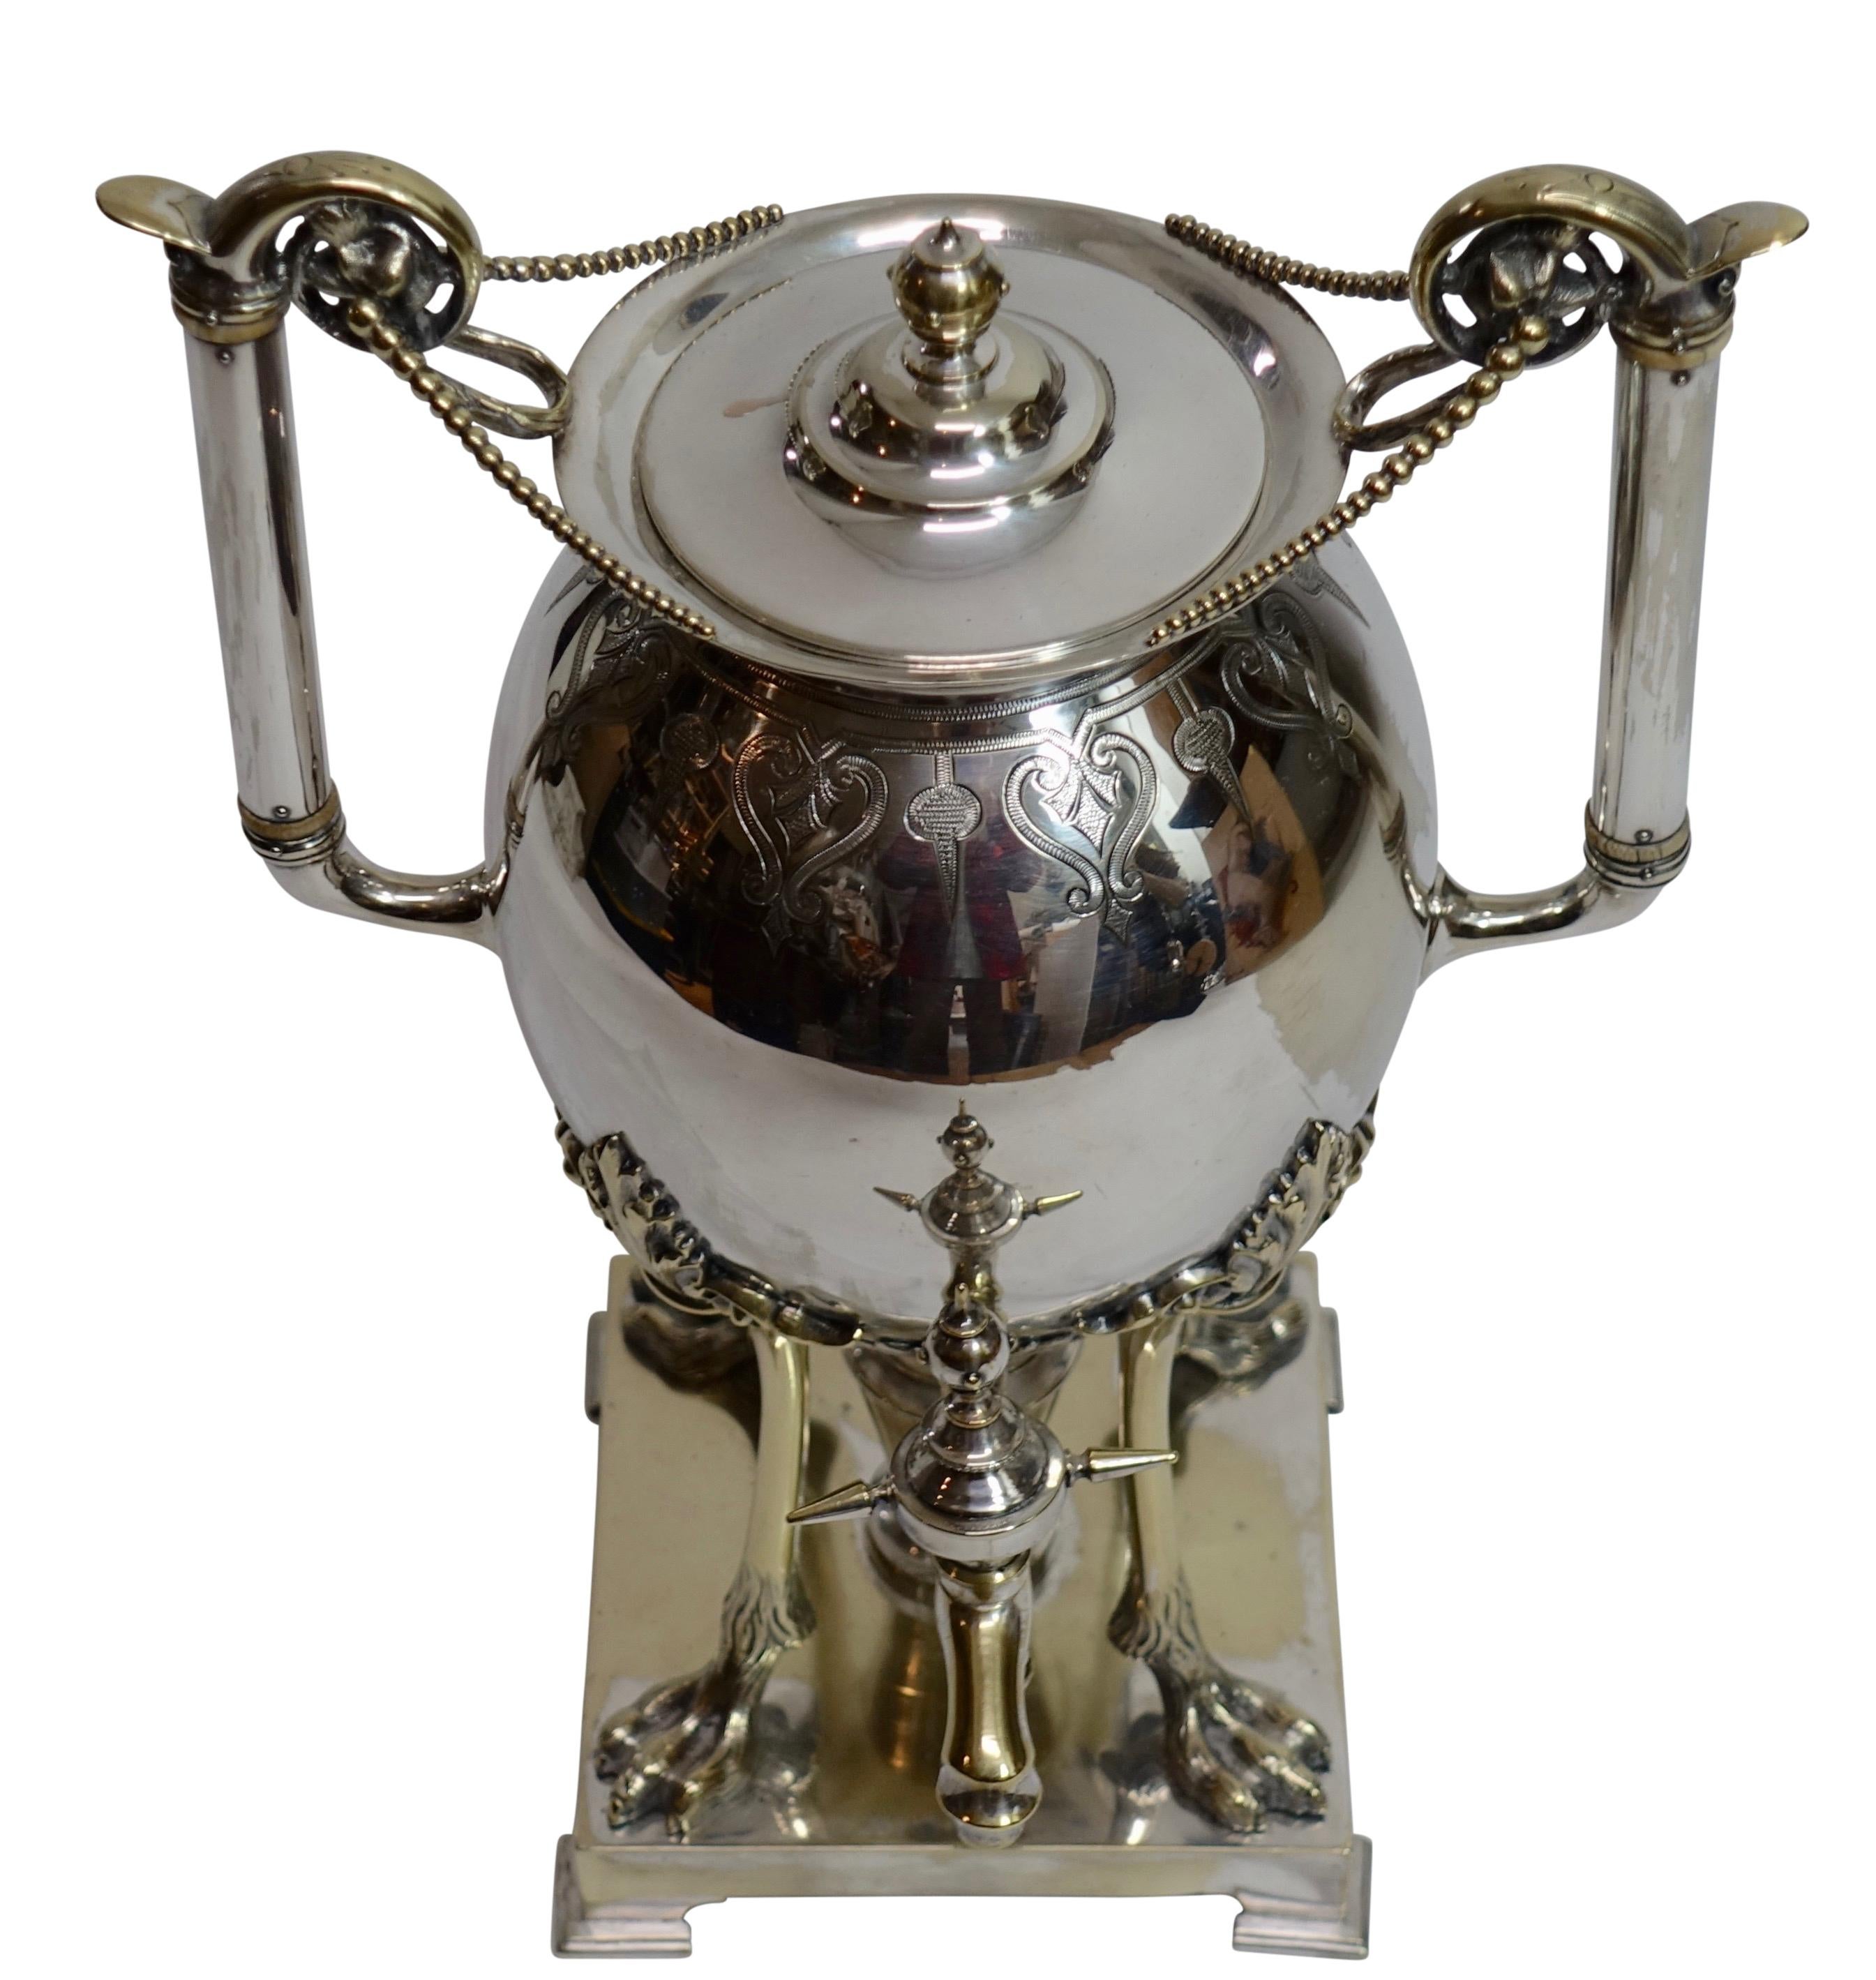 An Aesthetic period silver plate on brass hot water urn samovar. Wonderfully detailed and a very fine example of this style. American, late 19th century (1875-1890). 
Made by Manhattan Plating Co. N.Y.